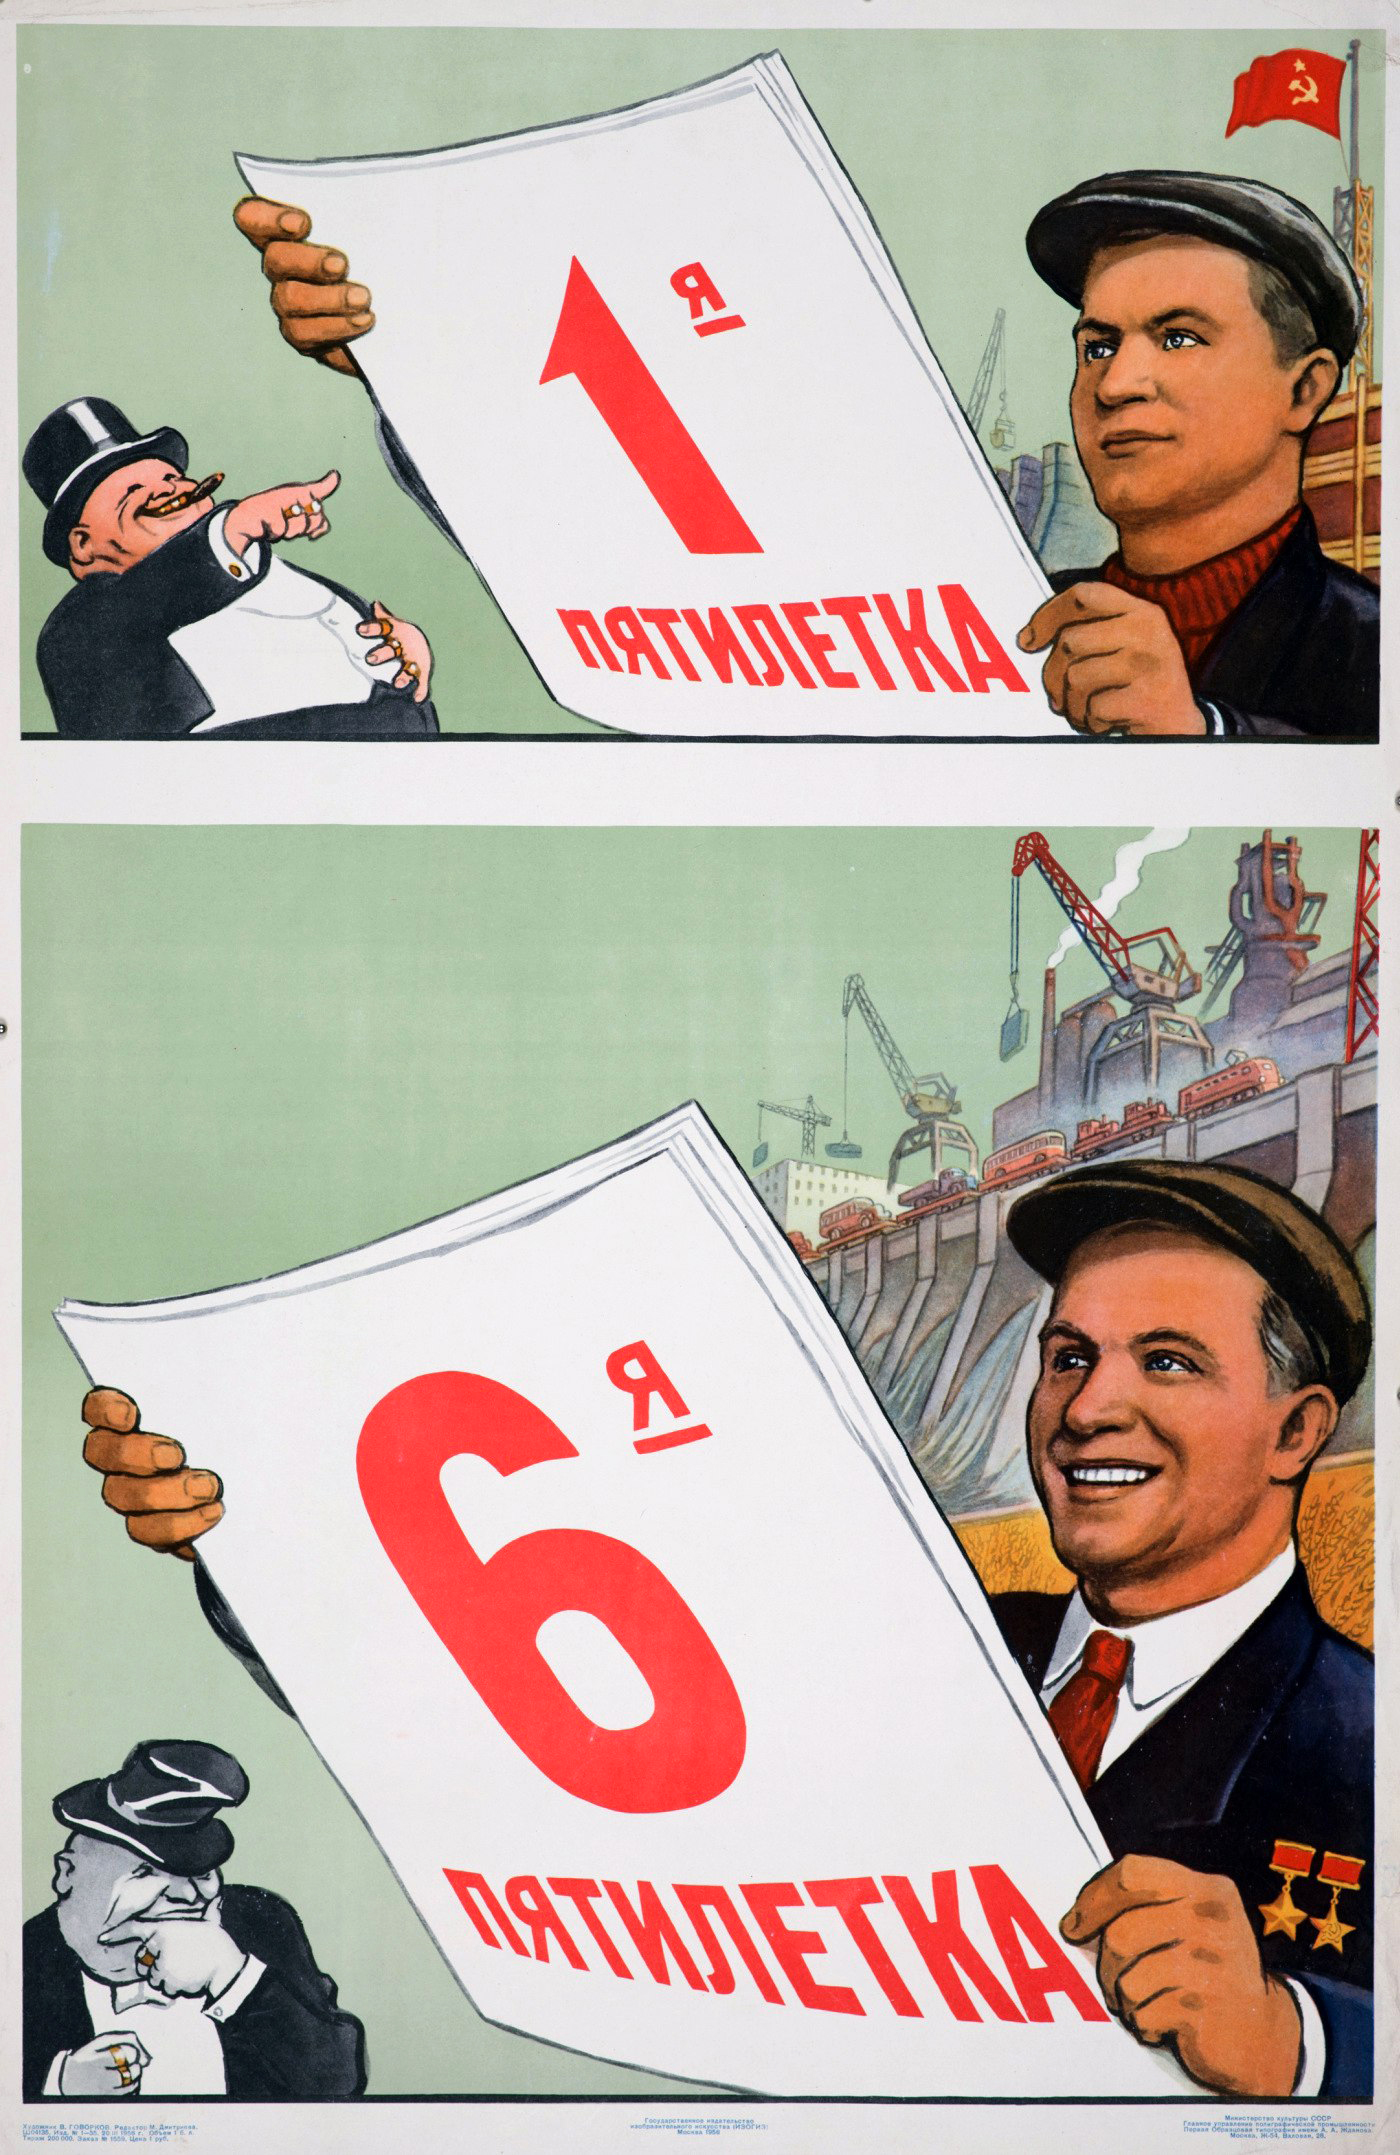 1st Five-Year Plan... 6th Five-Year Plan. USSR, 1964. - Poster, the USSR, Caricature, Socialism, Capitalism, Industry, Five-year plan, Soviet posters